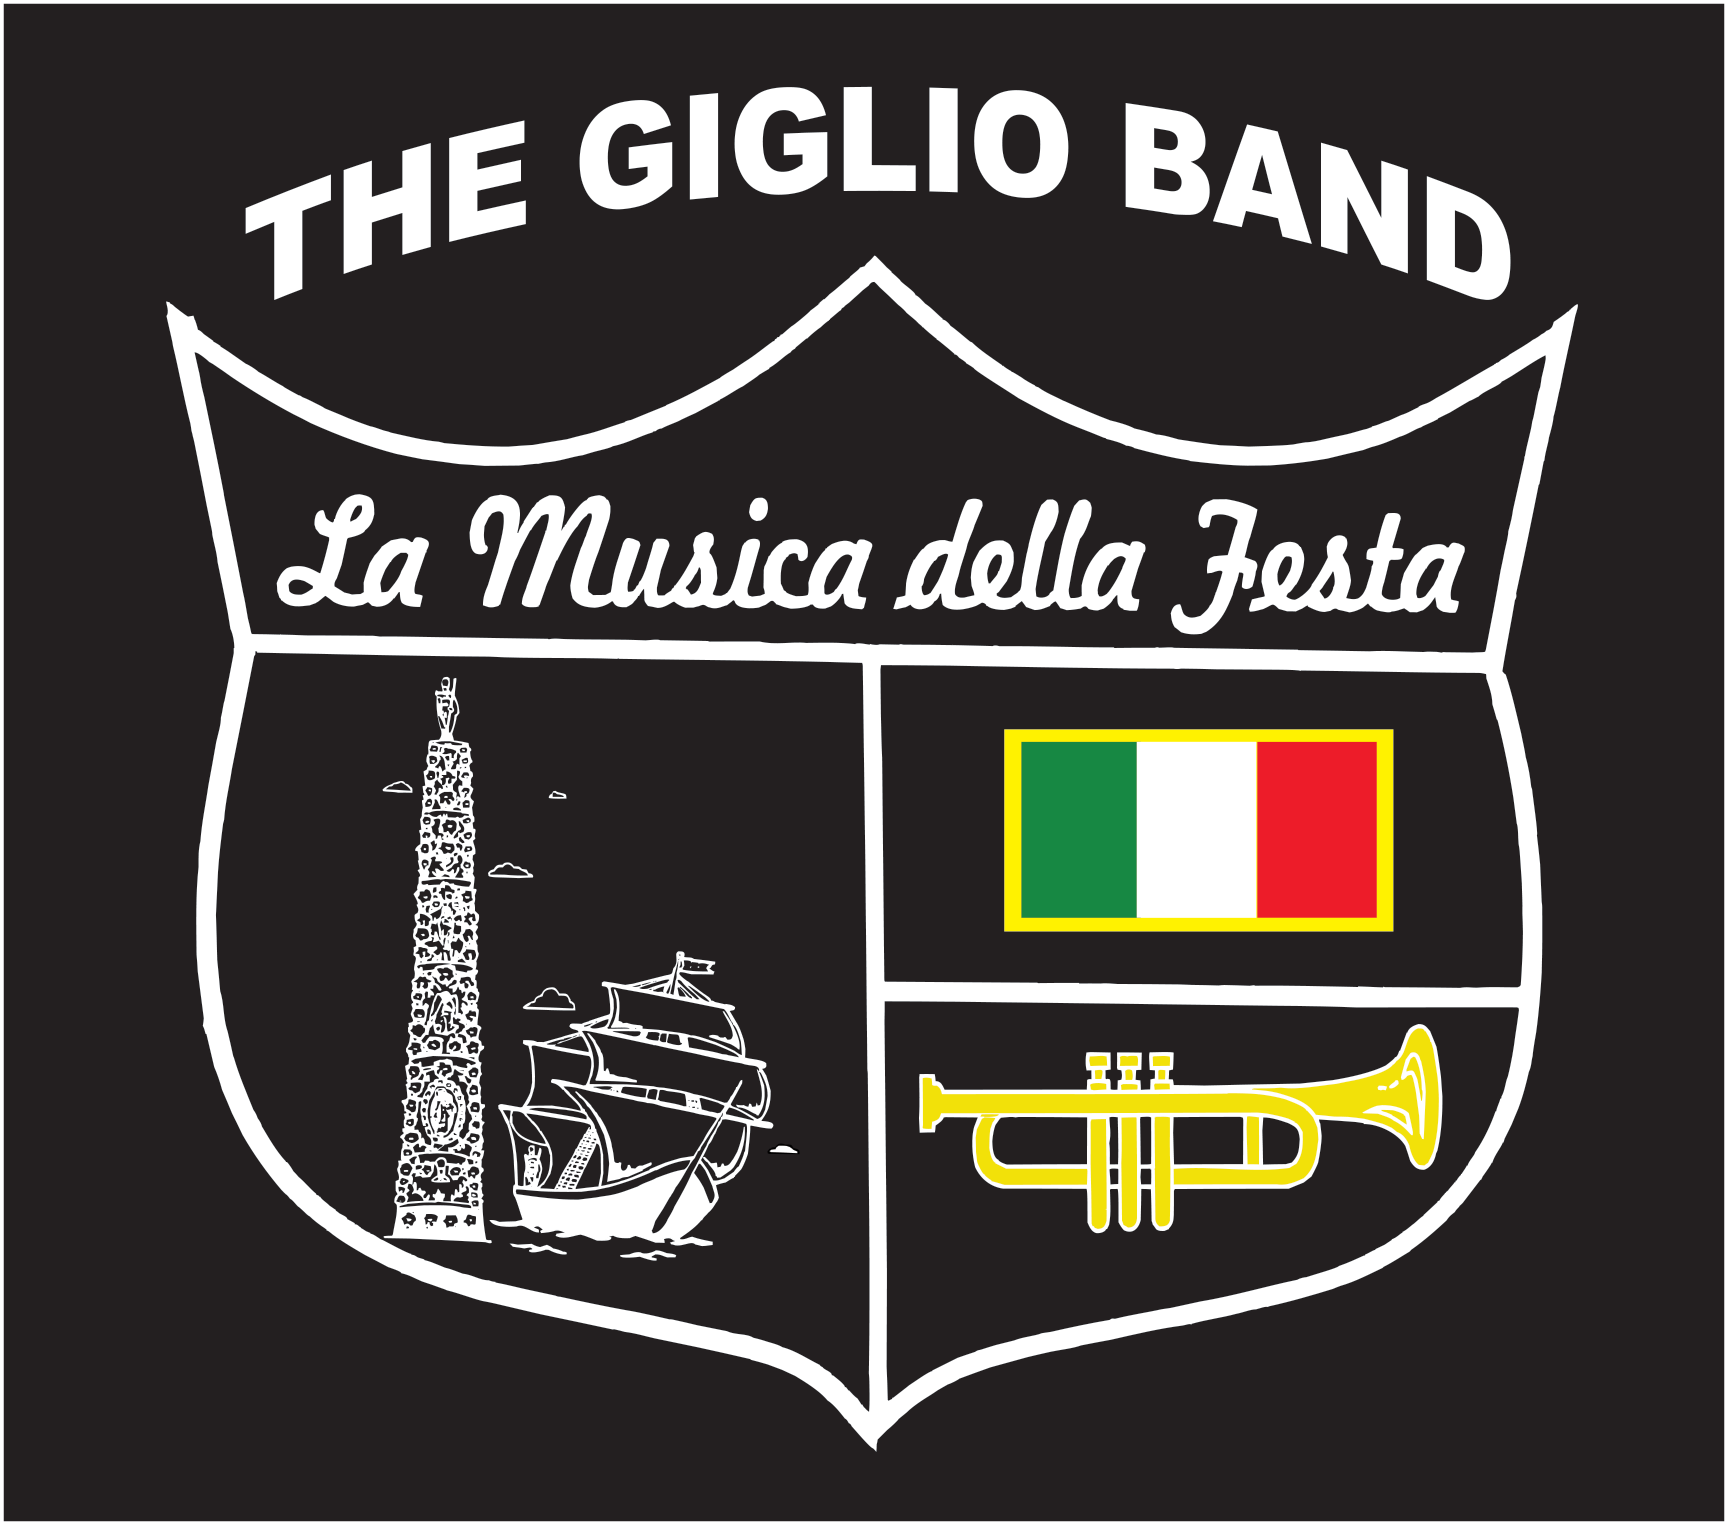 The Giglio Band